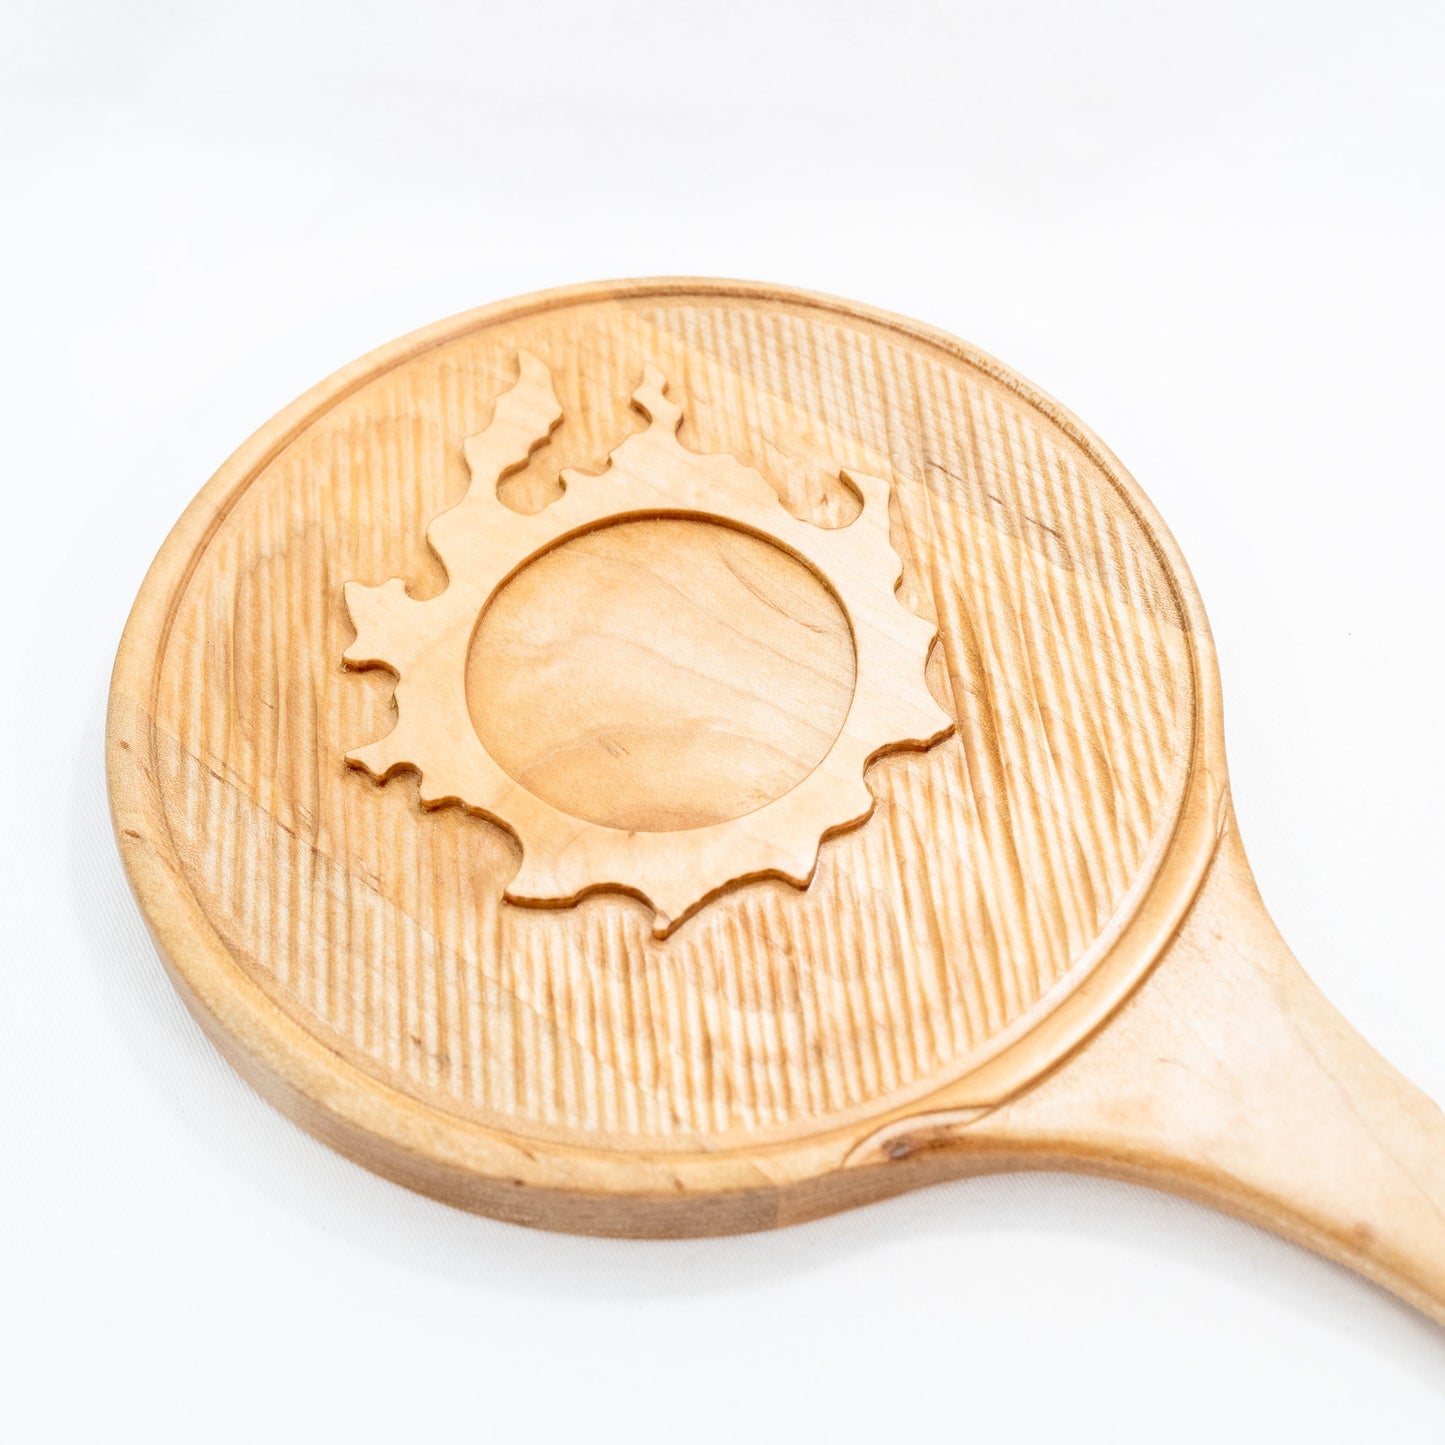 Handmade solid maple hand mirror with engraved cactuar characters around the glass and carved out meteor symbol on the back